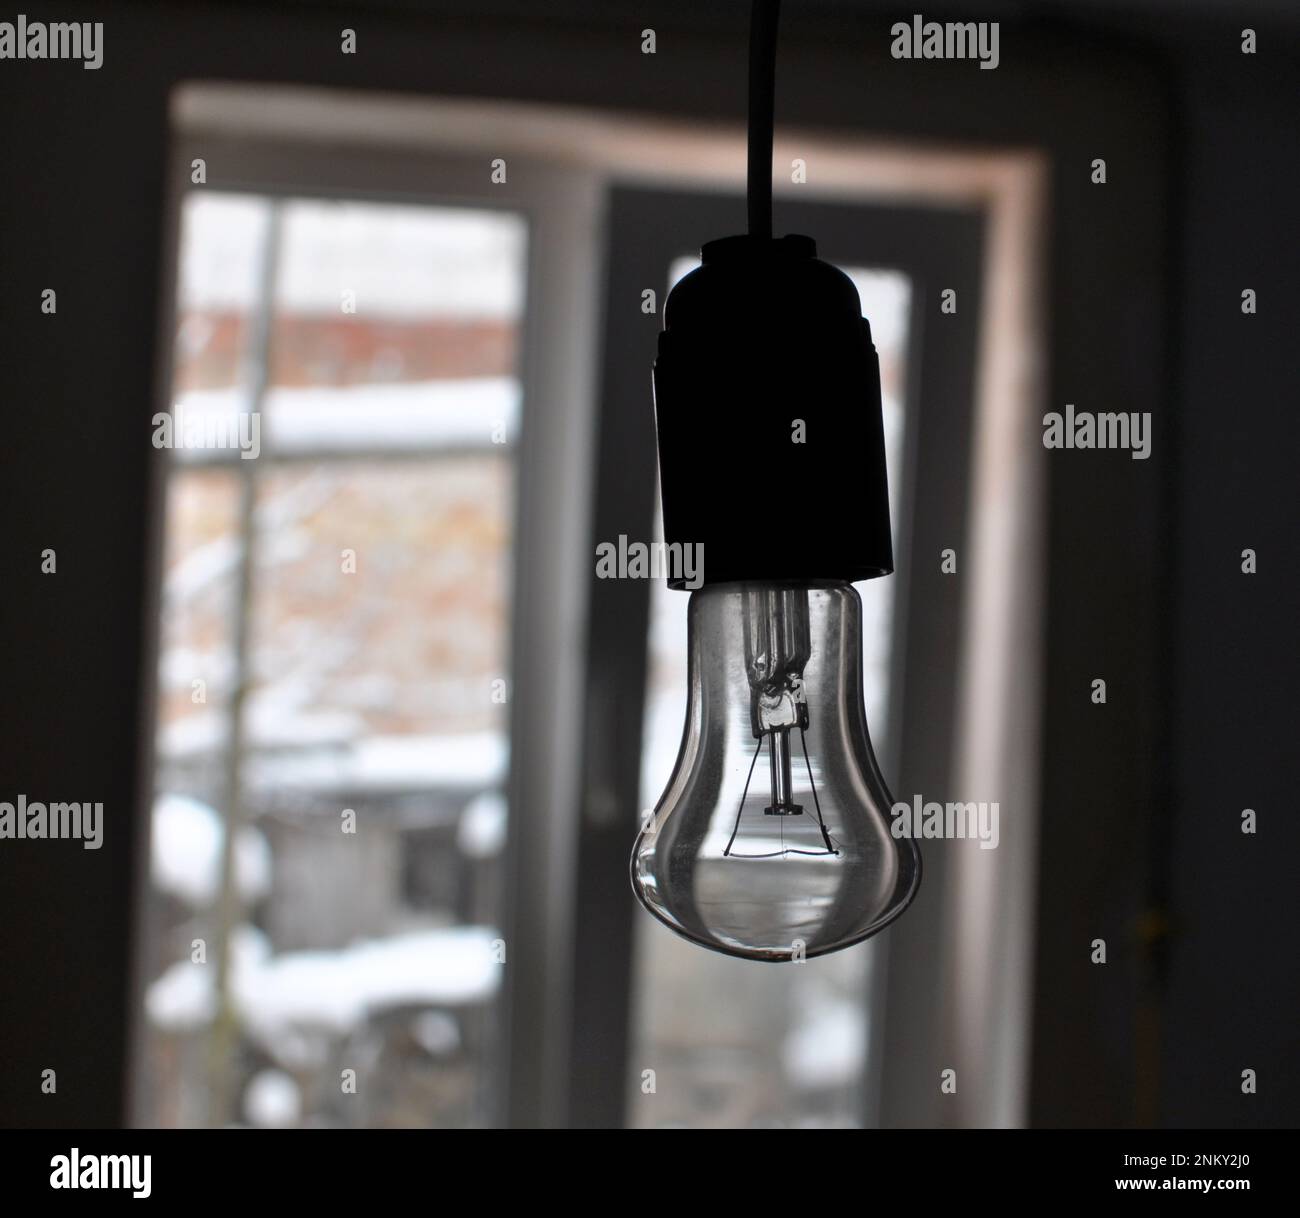 Due to the lack of electricity supply, the light bulb does not light up Stock Photo